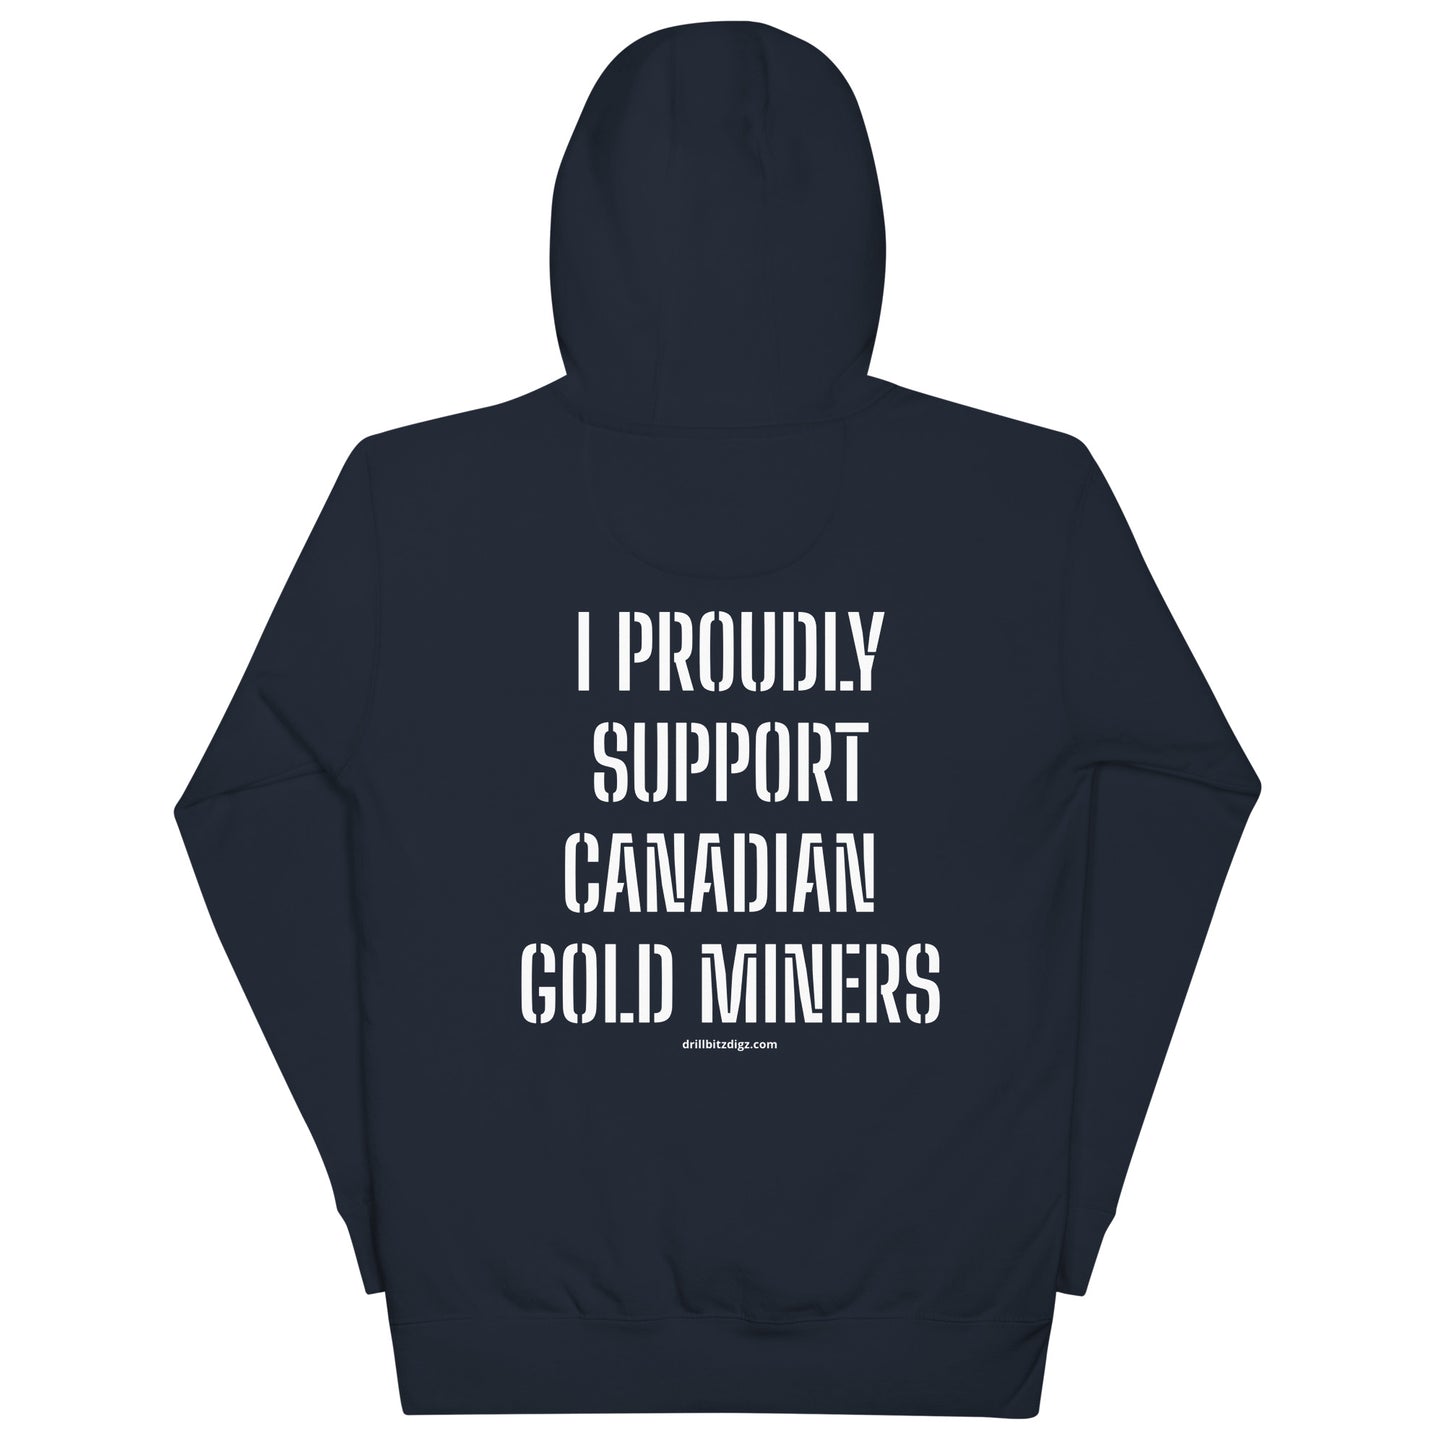 I PROUDLY SUPPORT CANADIAN GOLD MINERS Hoodie